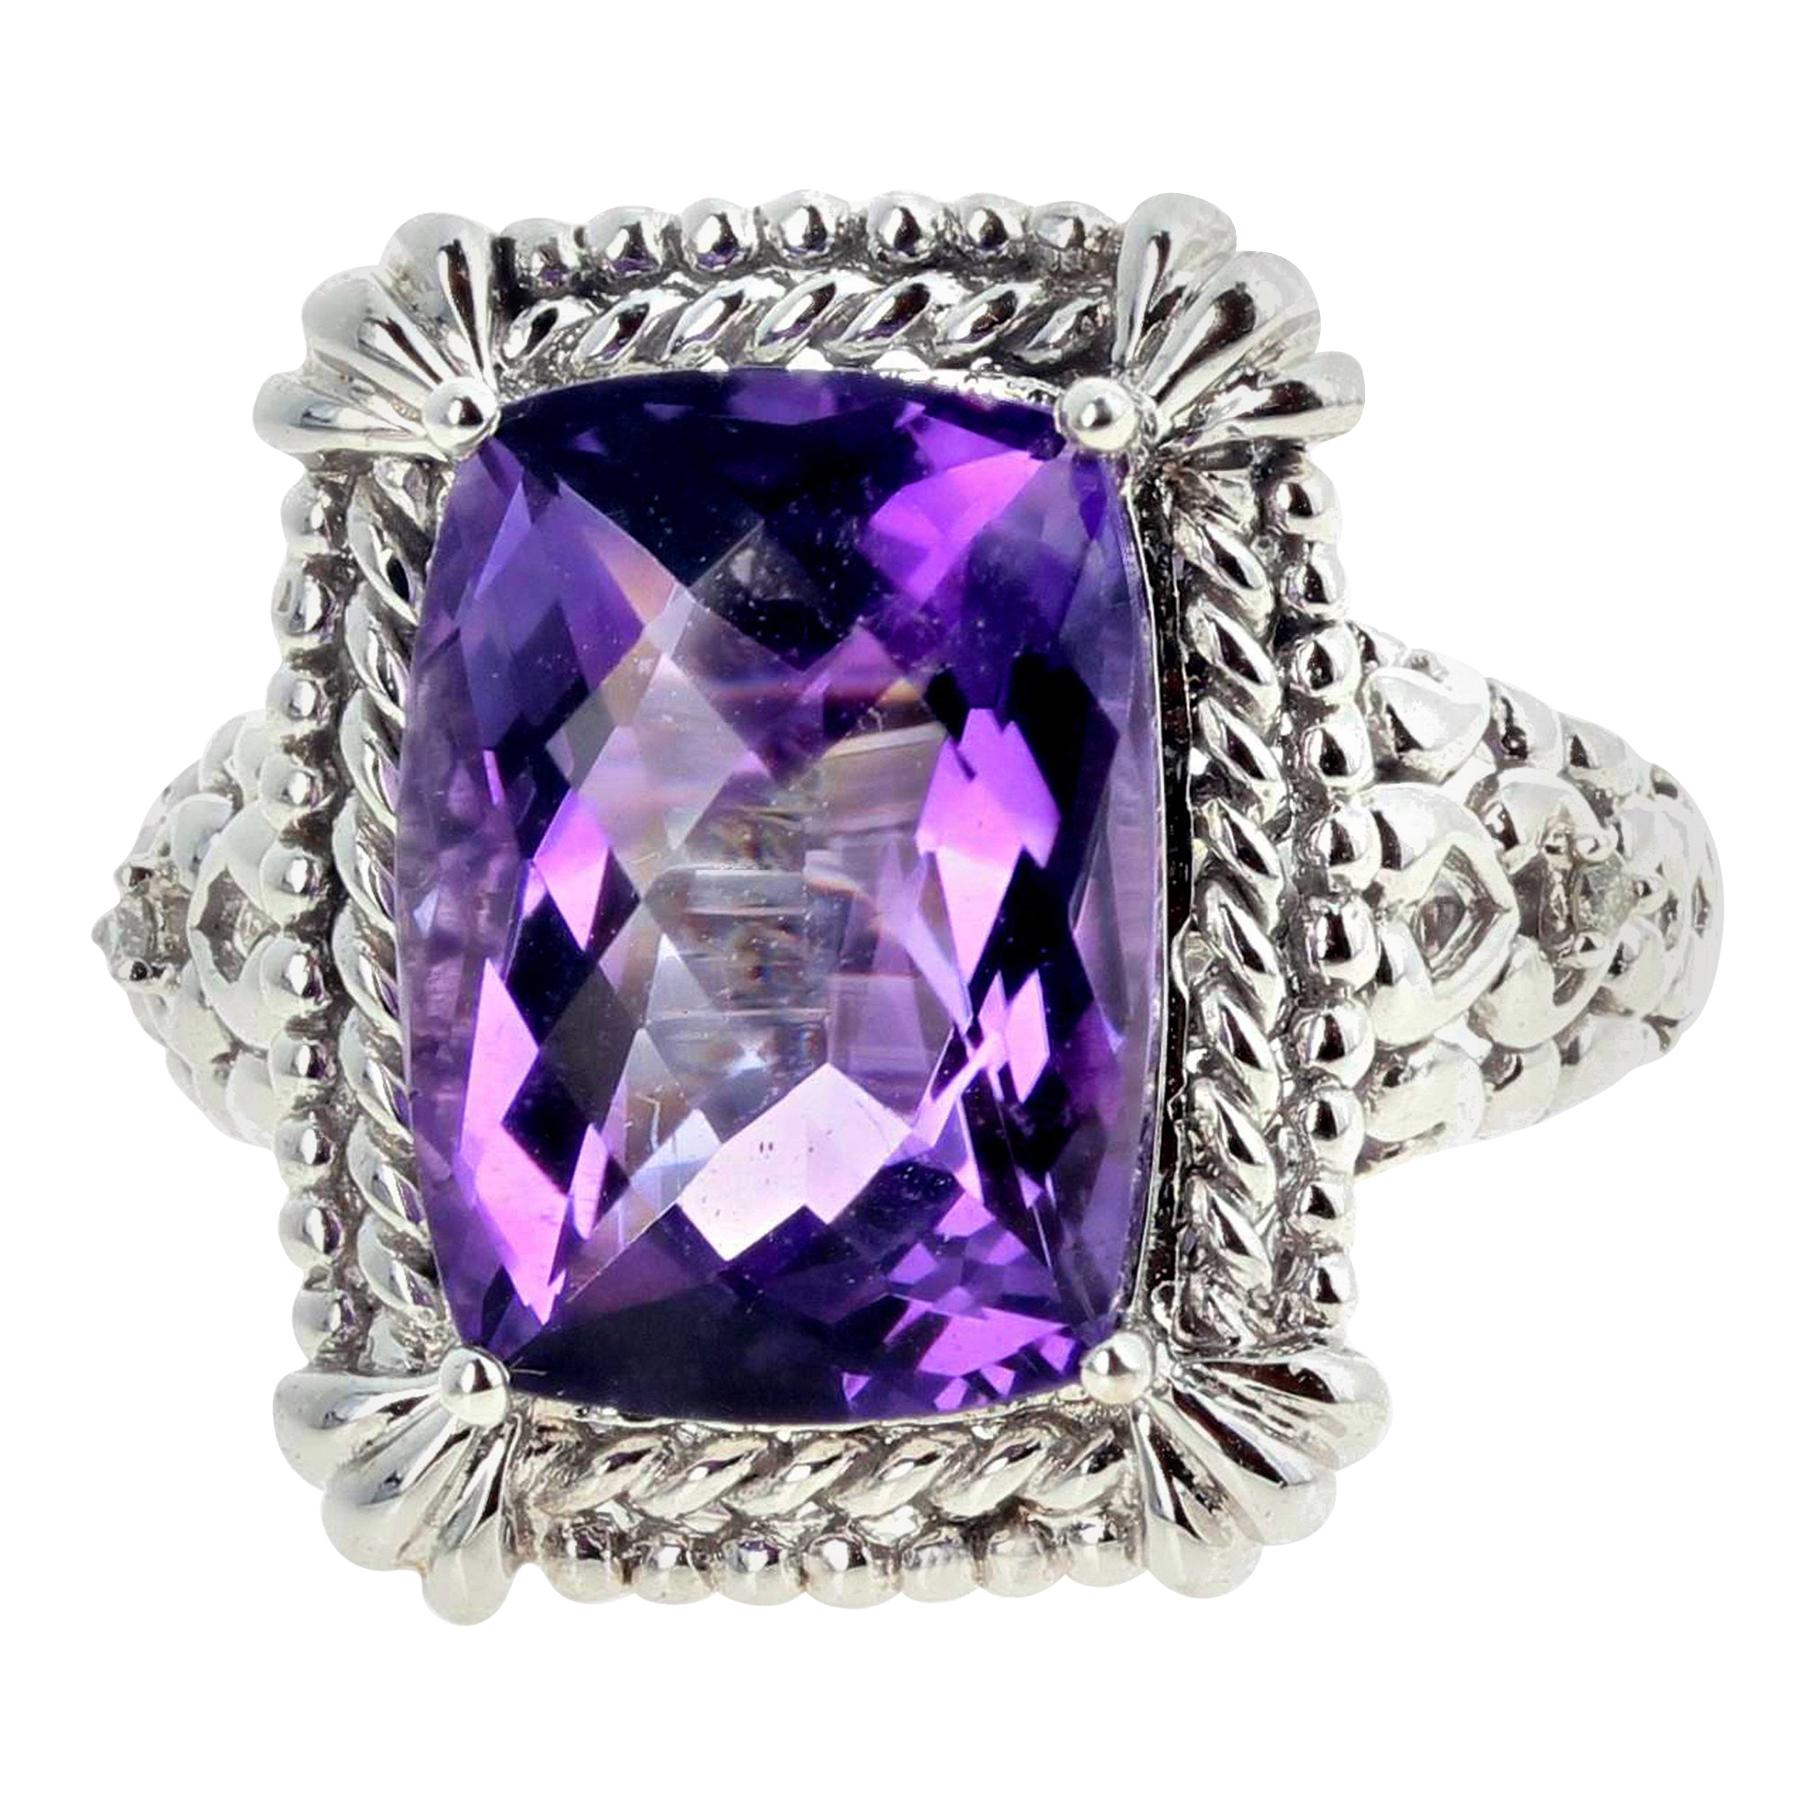 AJD Eye-Catching Natural 6.15 Carat Brilliant Amethyst White Gold Ring